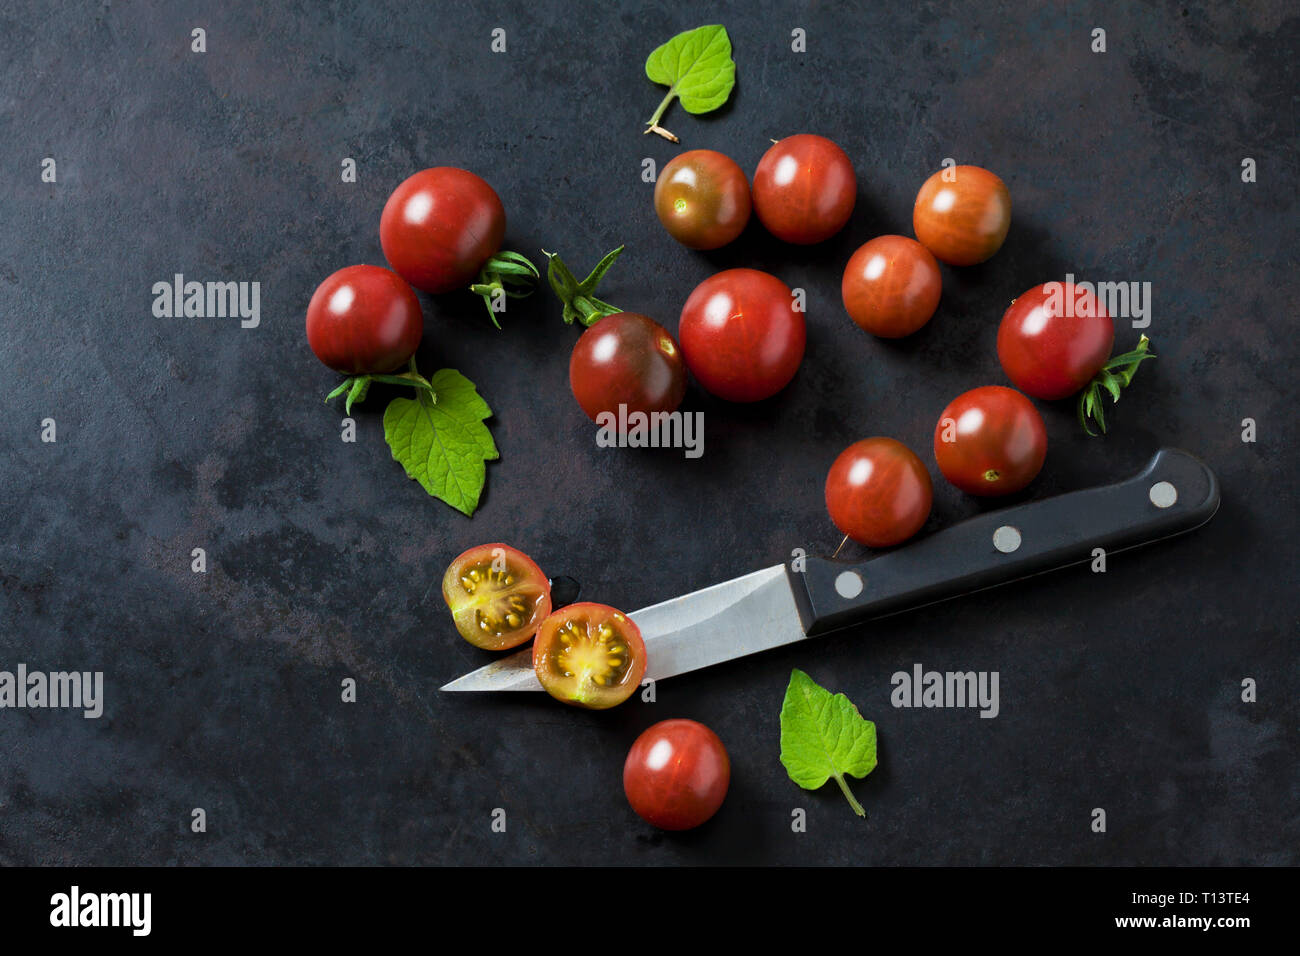 Whole and sliced risp tomatoes 'Black Cherry', leaves and kitchen knife on dark ground Stock Photo